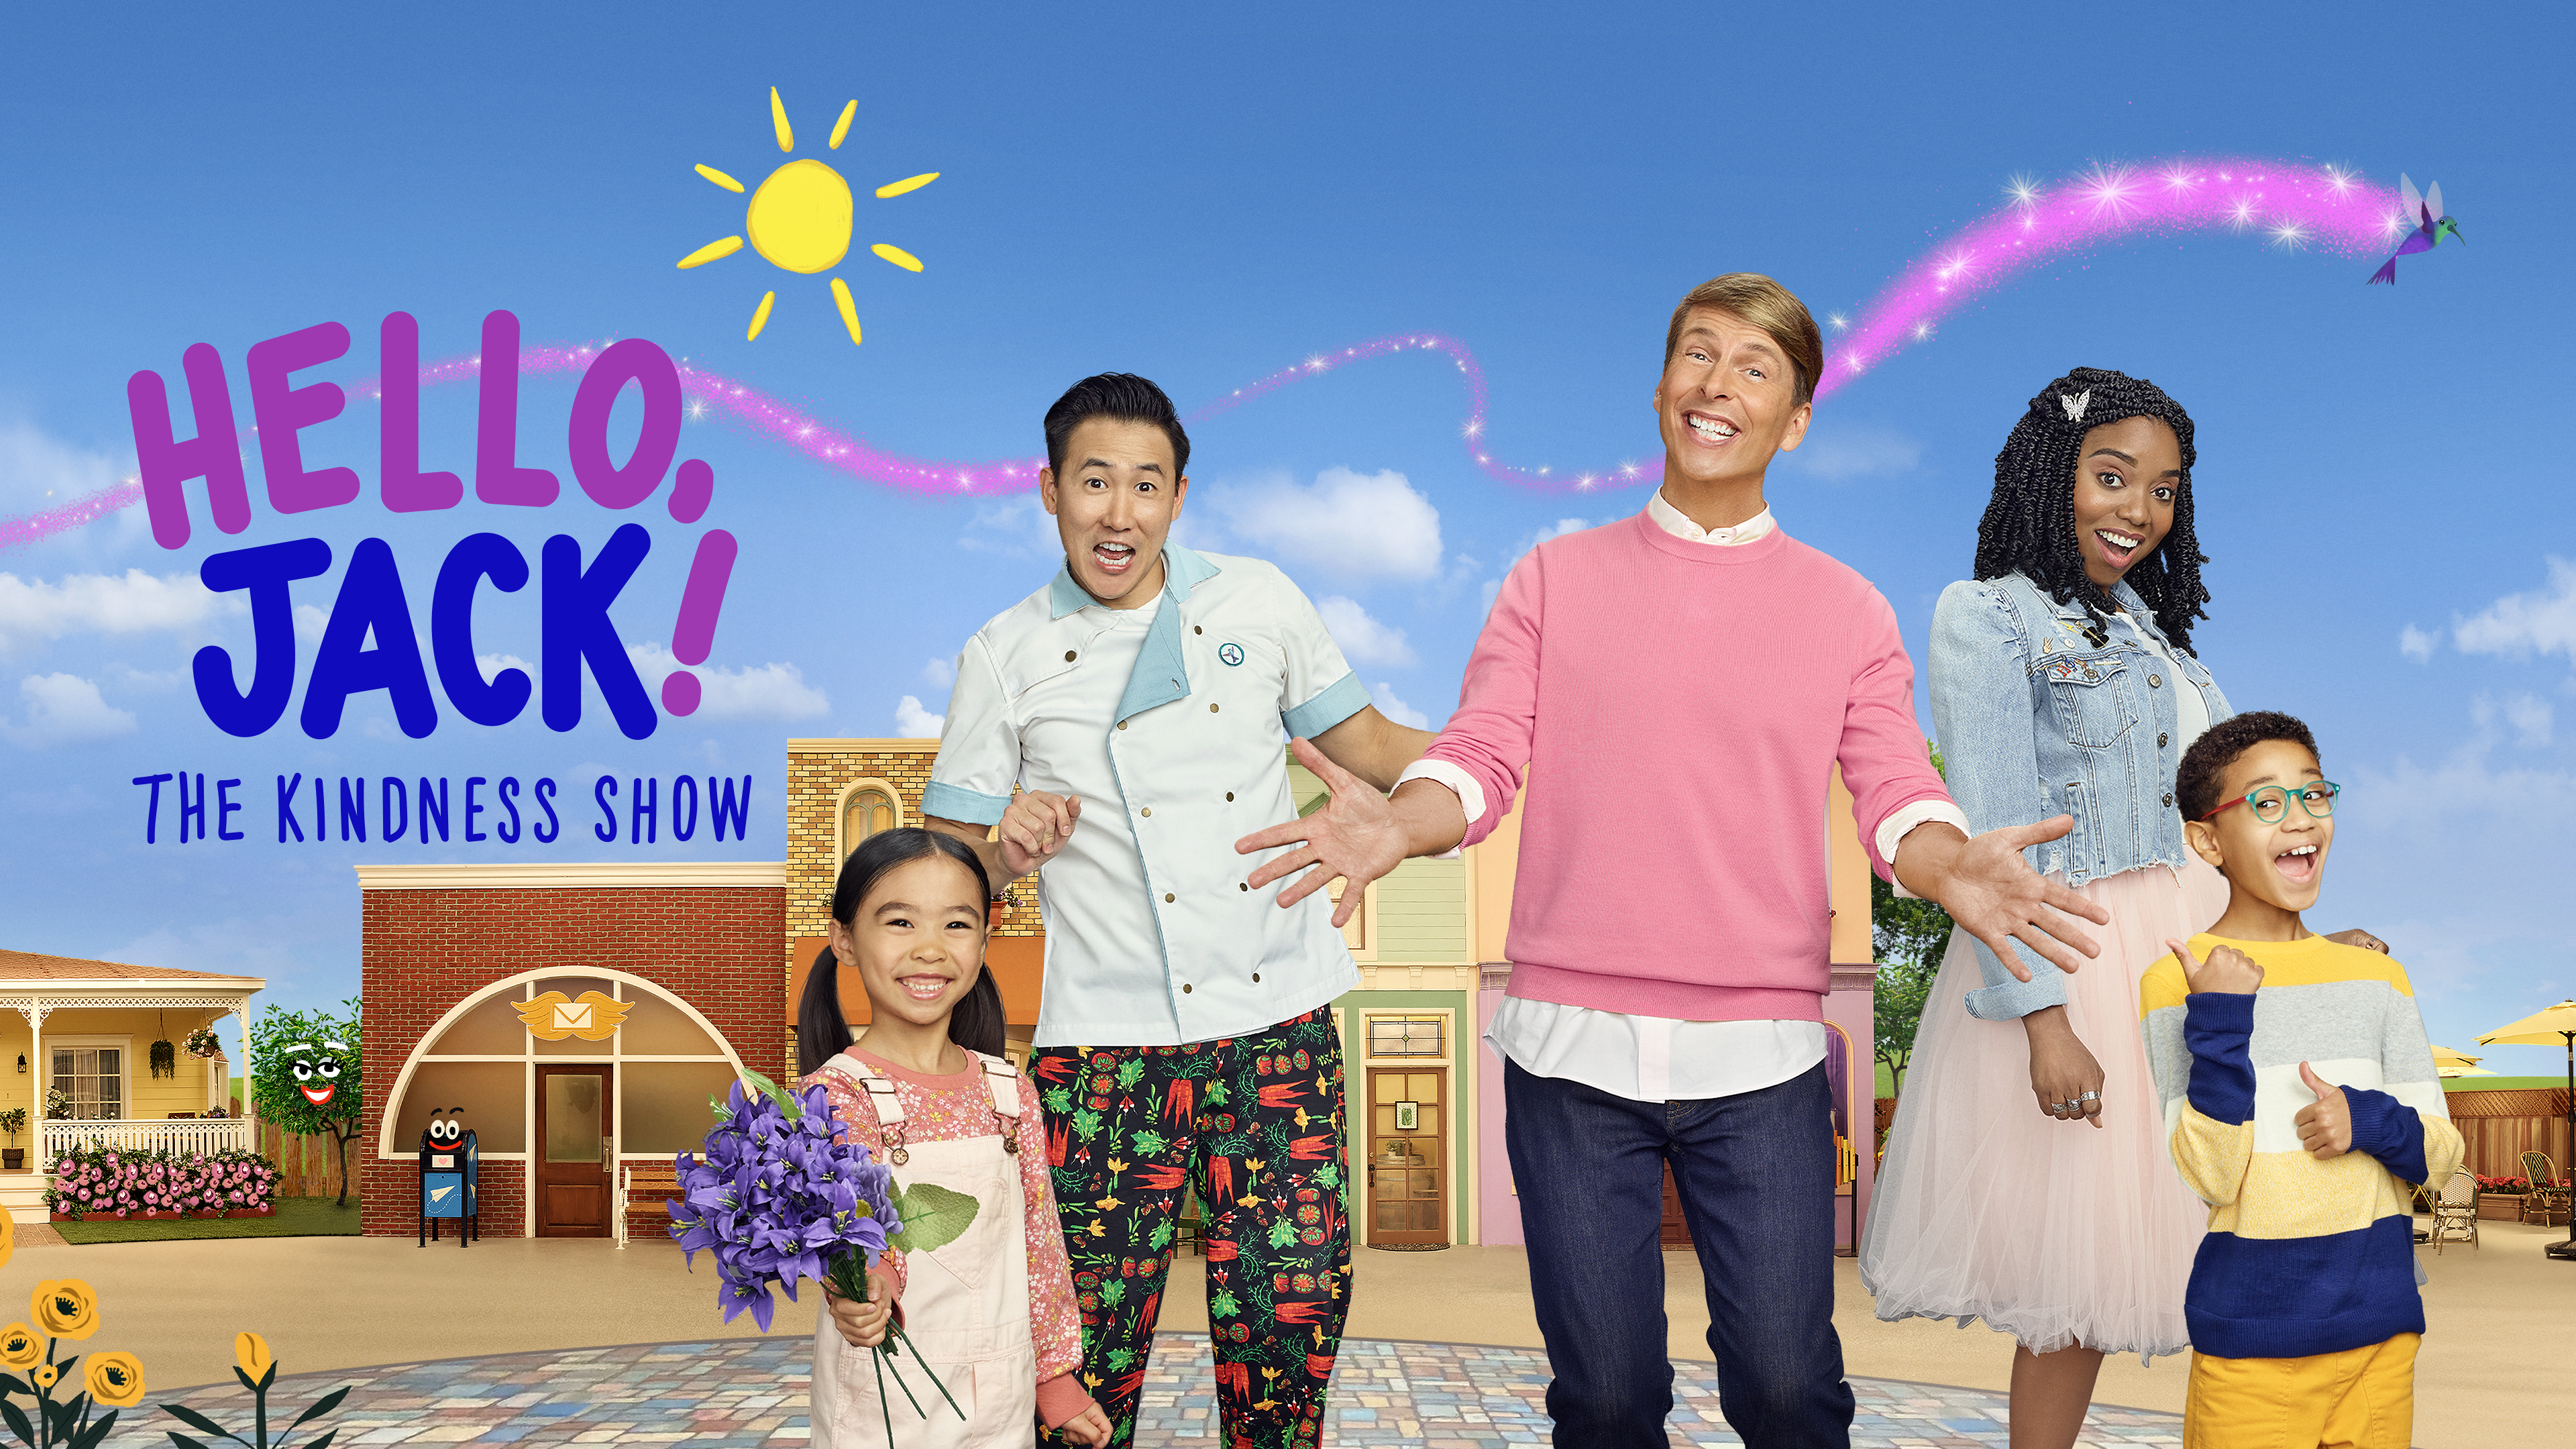 A group of 5 people, standing in front of a background with sunshine and a blue sky. The title "Hello, Jack! The Kindness Show" appears on the left.